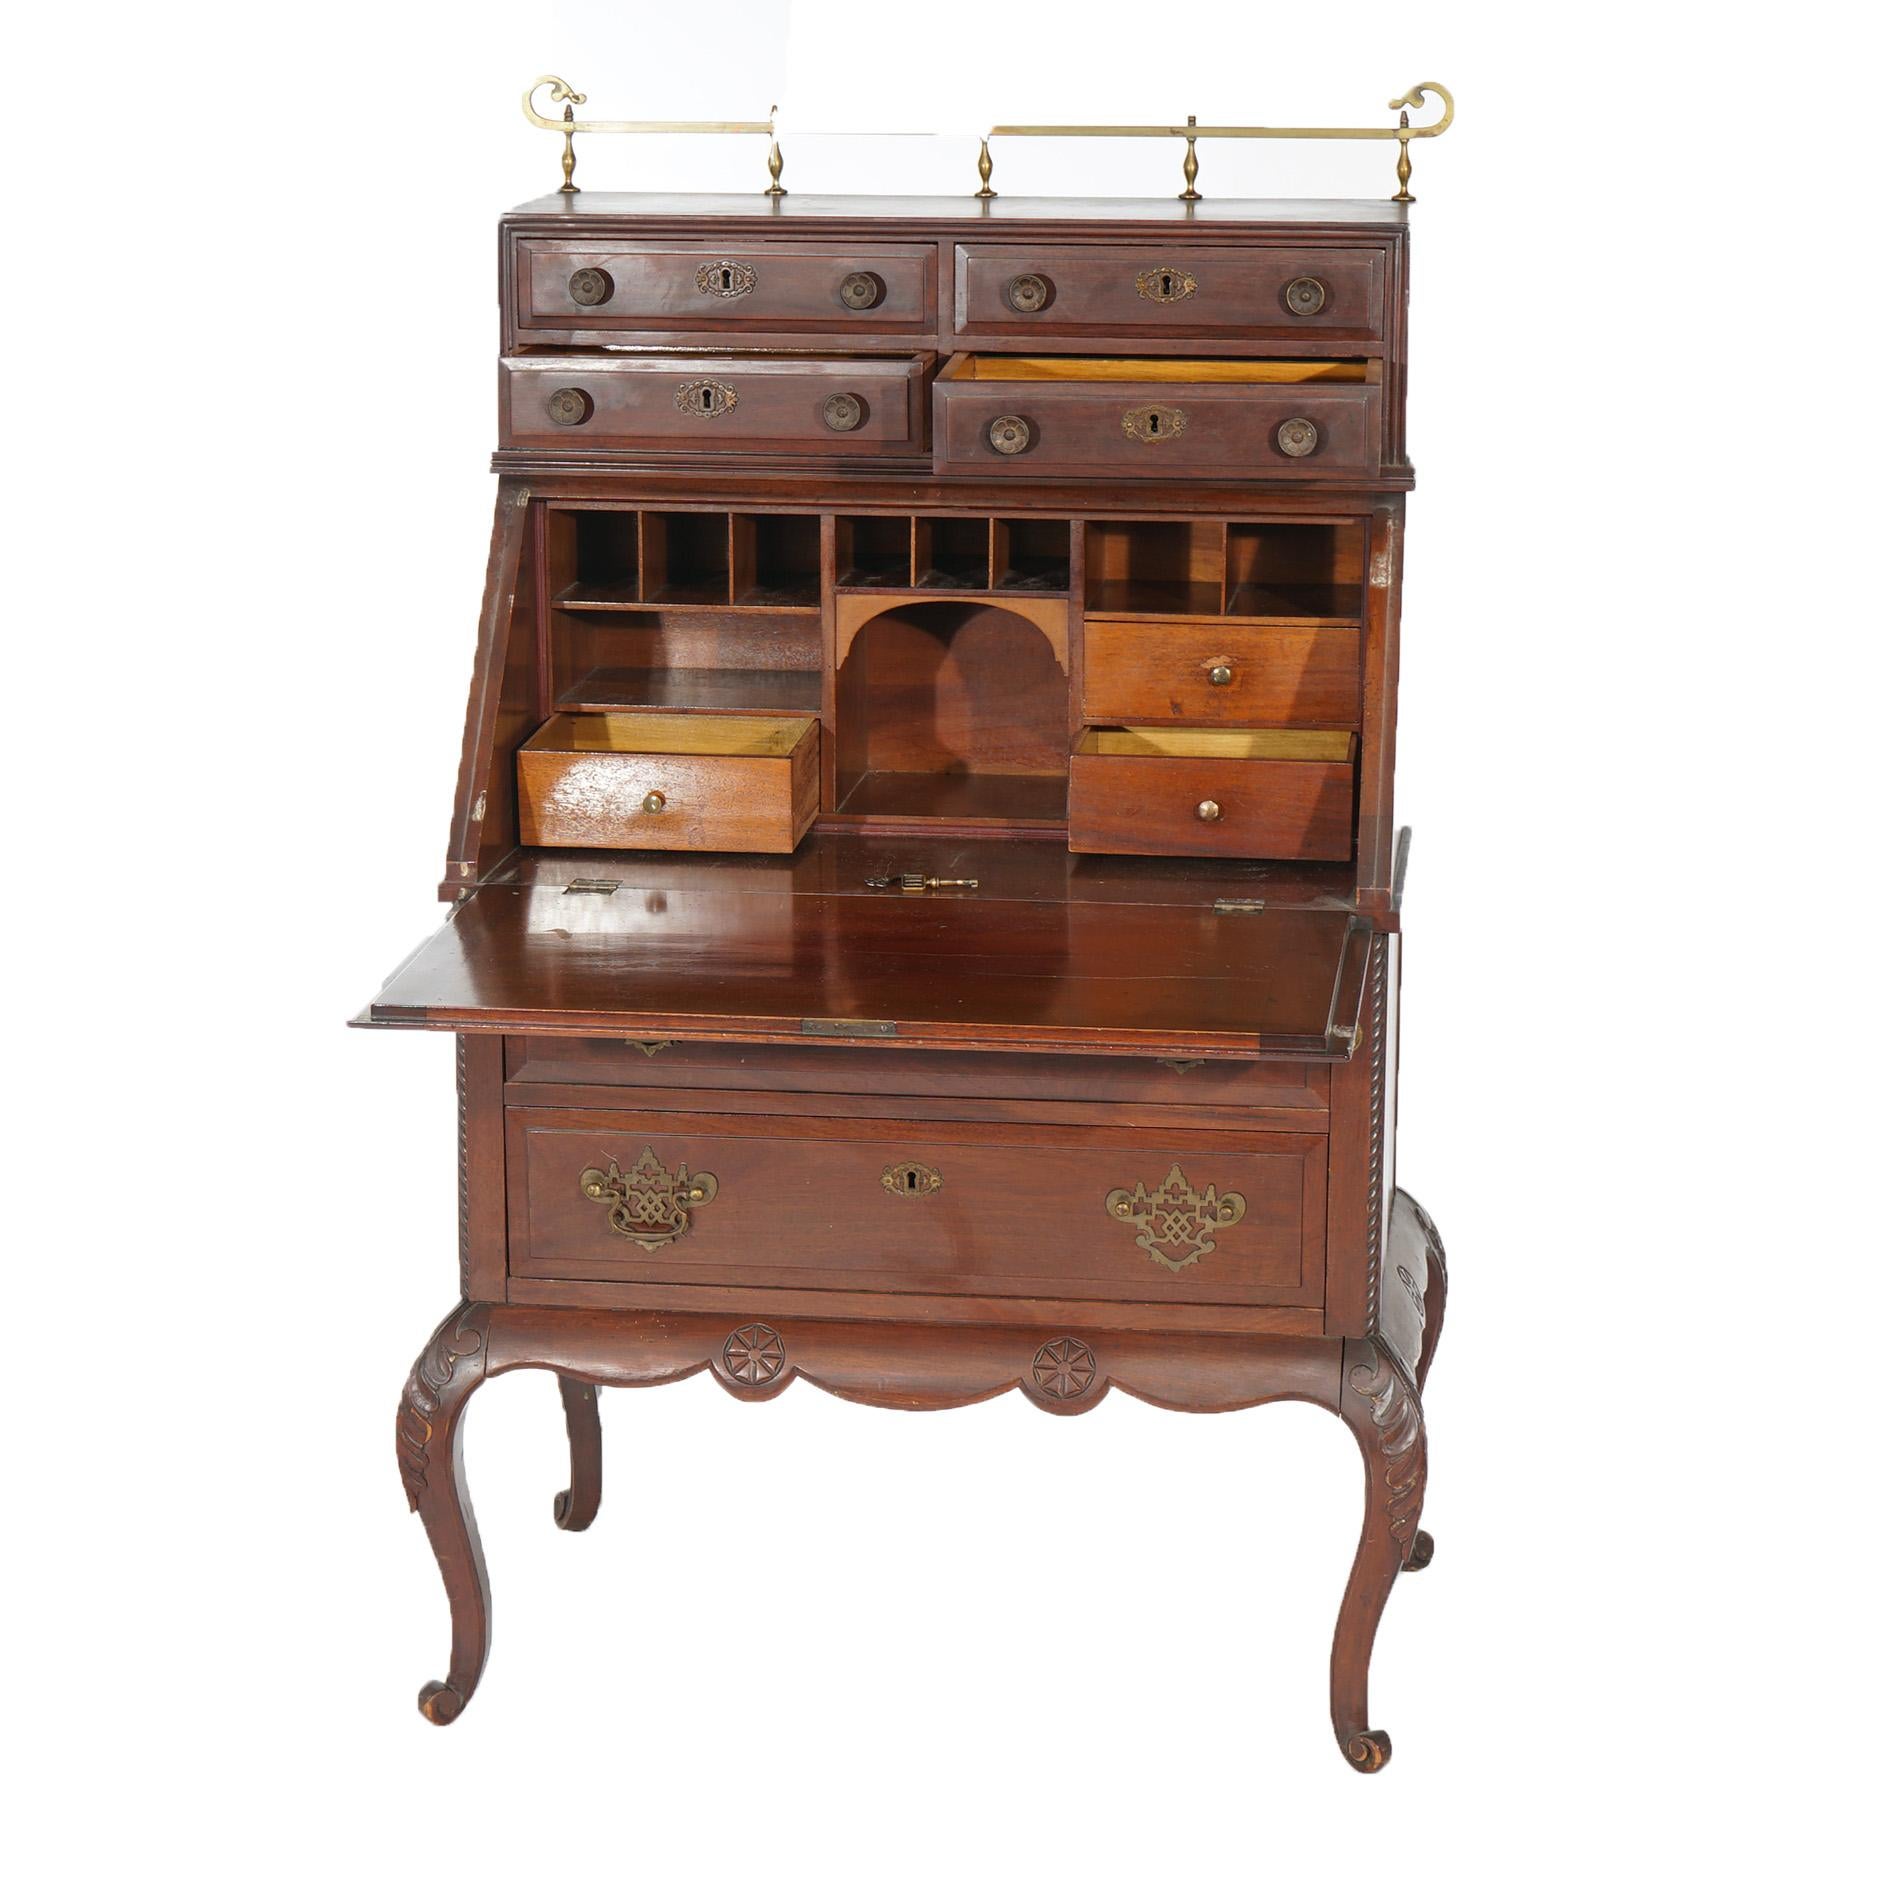 An antique secretary offers mahogany construction with upper brass gallery over upper case with drawers over slant-front desk with carved patera reserve, raised on cabriole legs, c1910

Measures - 55.75